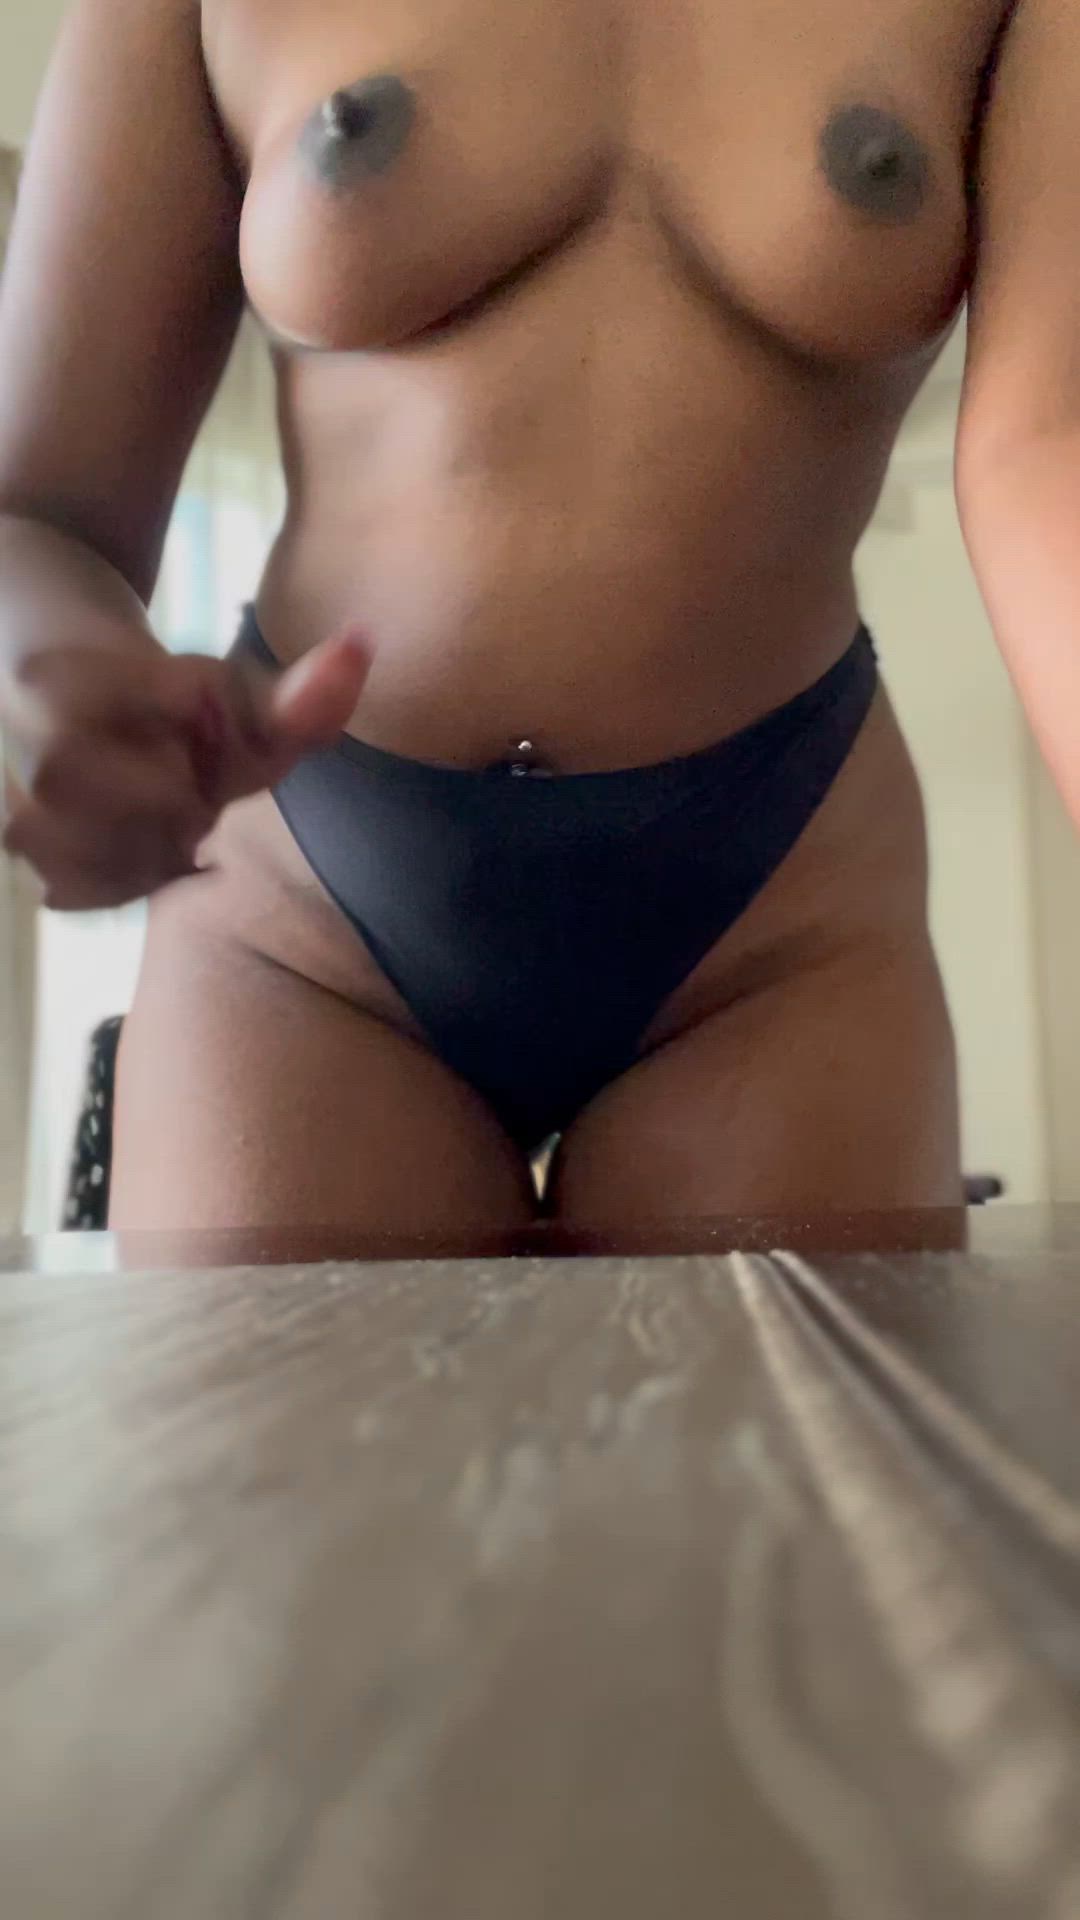 Ass porn video with onlyfans model CreamyBrownGirl <strong>@creamybrowngirl</strong>